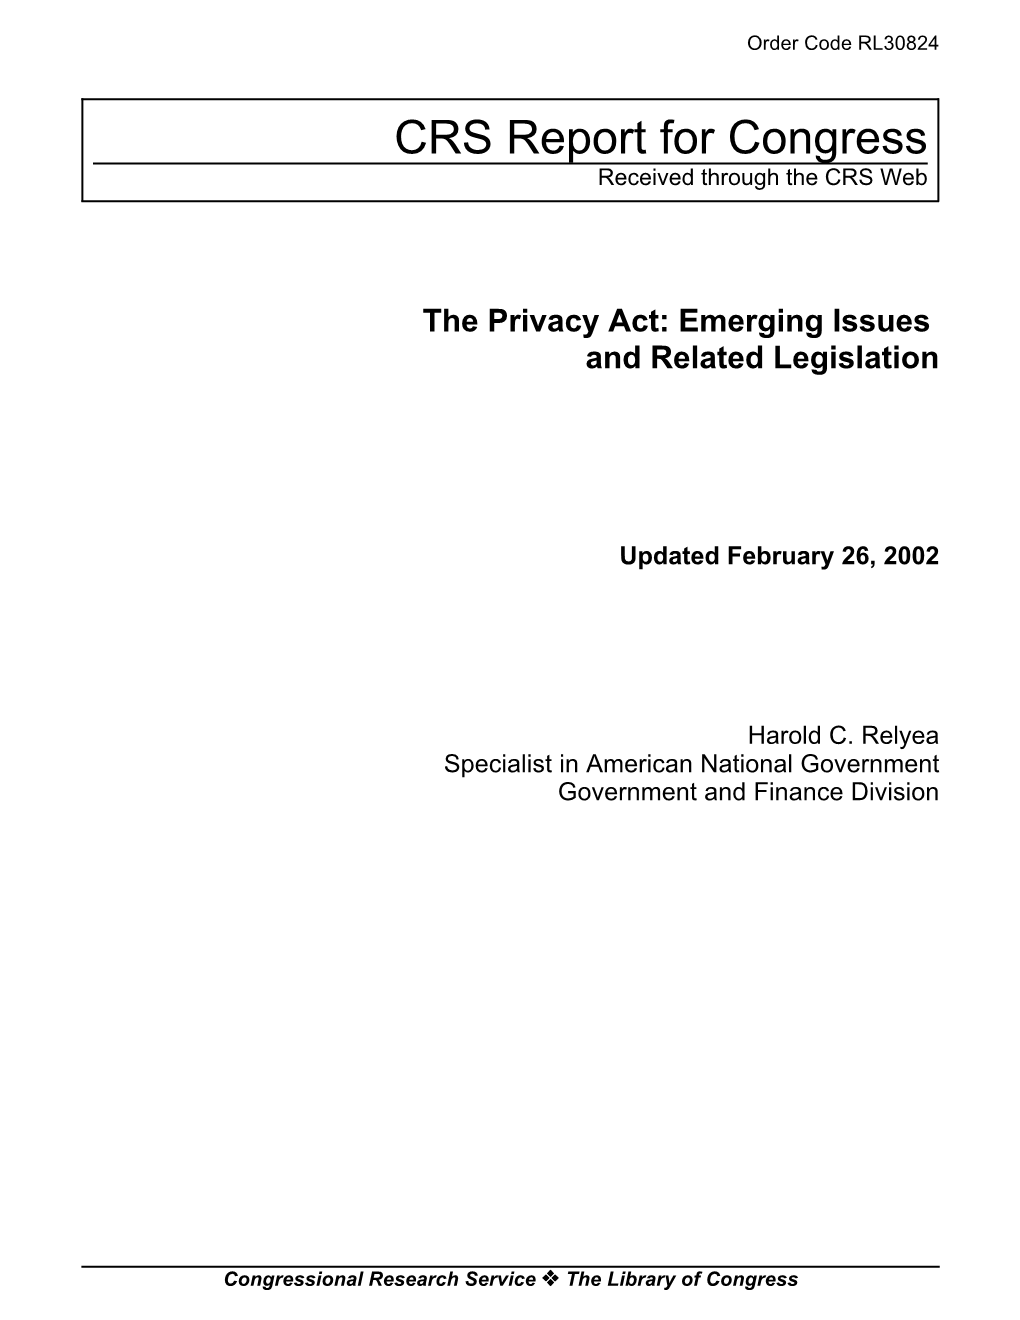 The Privacy Act: Emerging Issues and Related Legislation